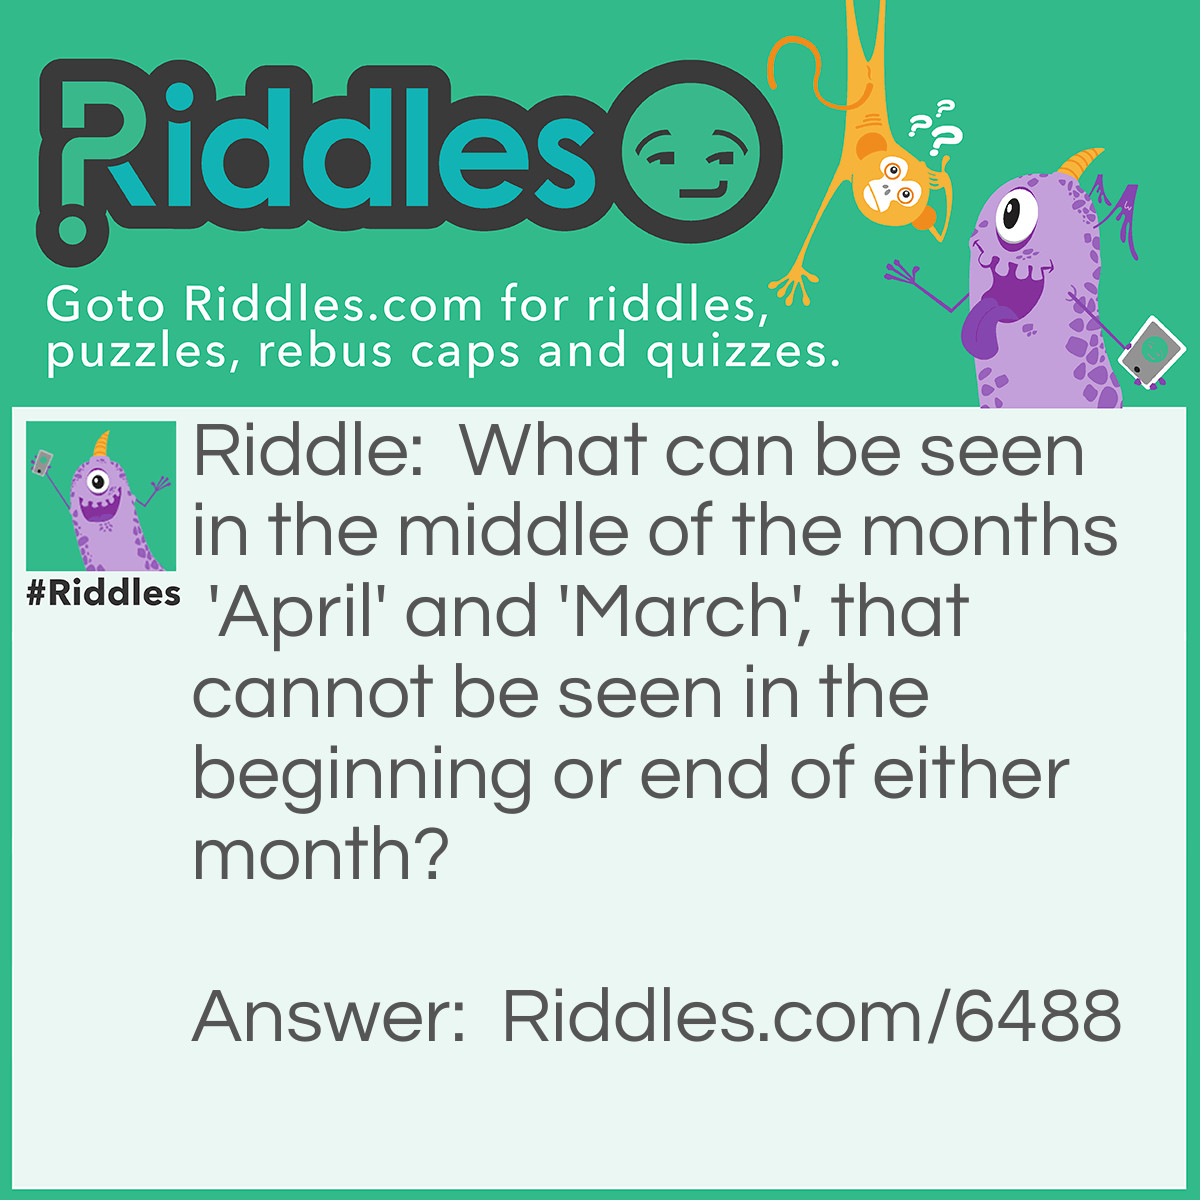 Riddle: What can be seen in the middle of the months 'April' and 'March', that cannot be seen in the beginning or end of either month? Answer: The letter "r".